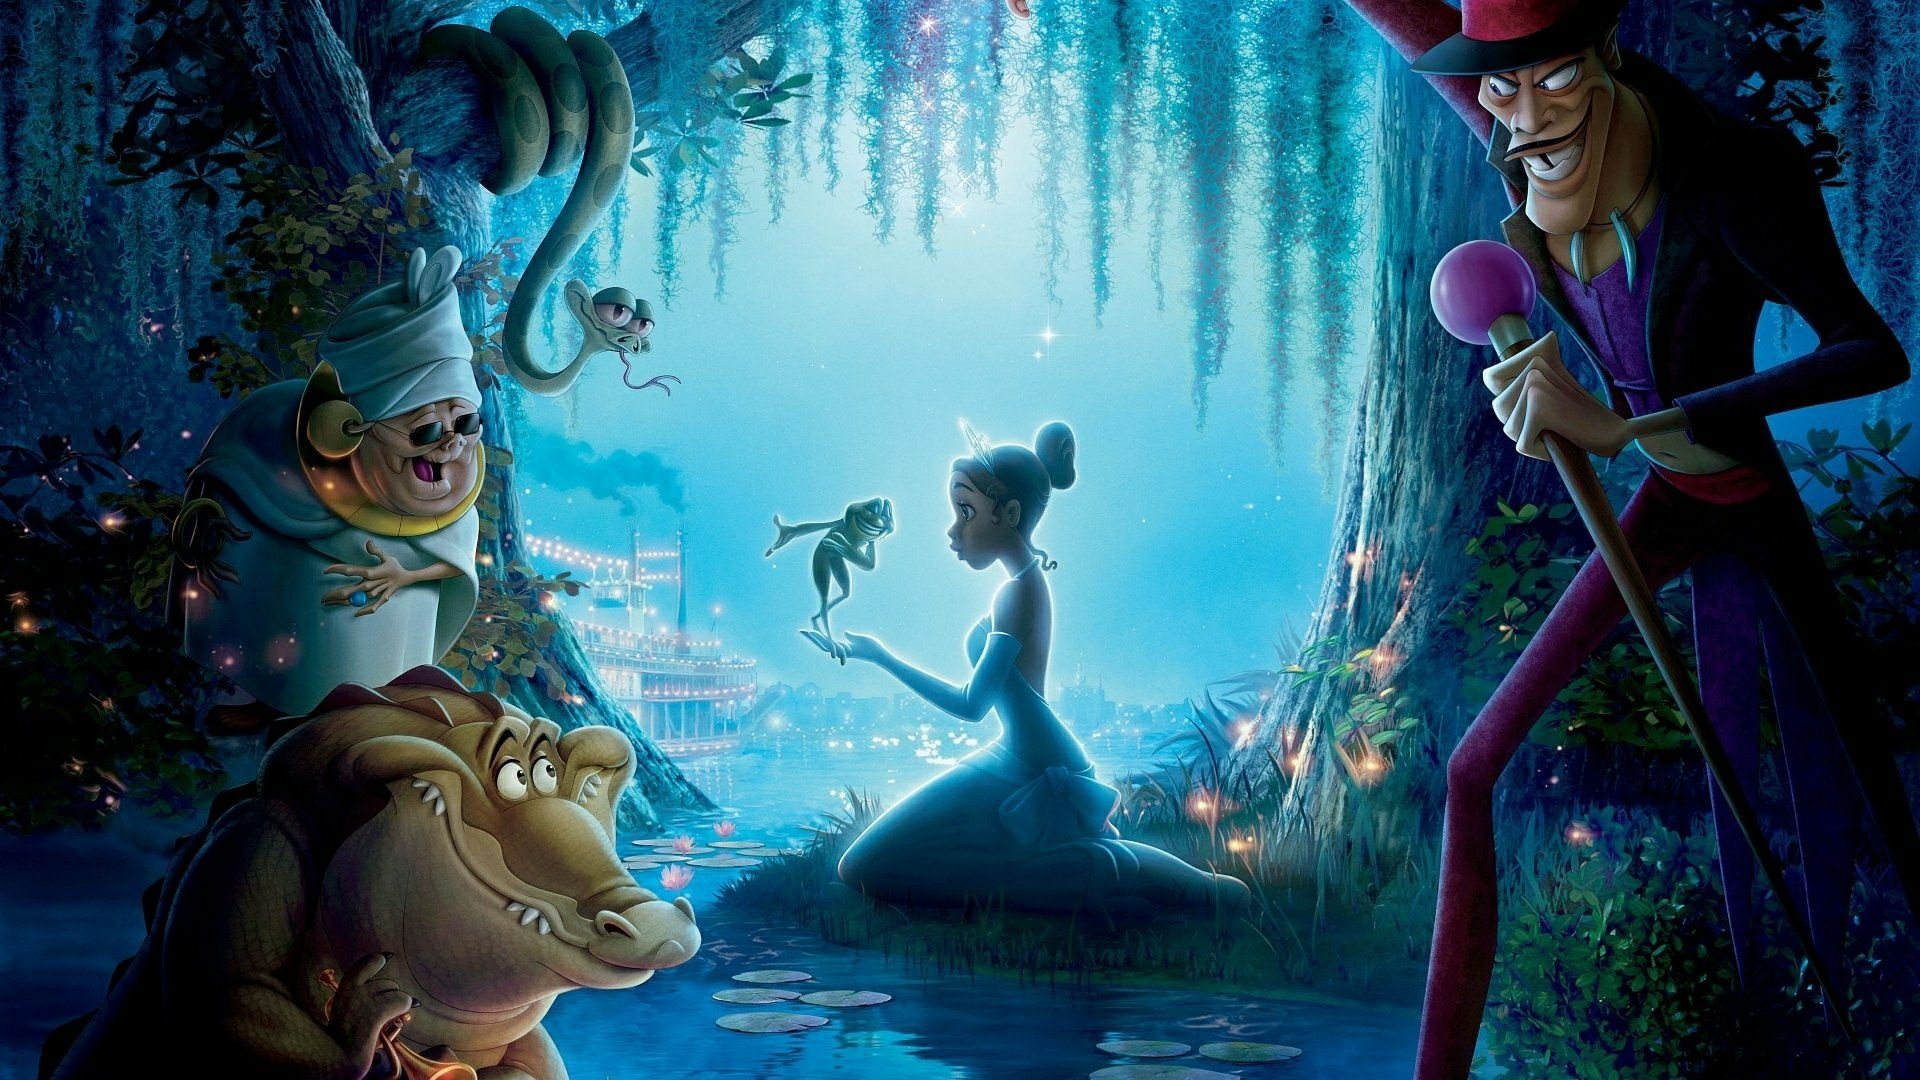 The Princess and the Frog, 20 wallpapers, 1920x1080 Full HD Desktop